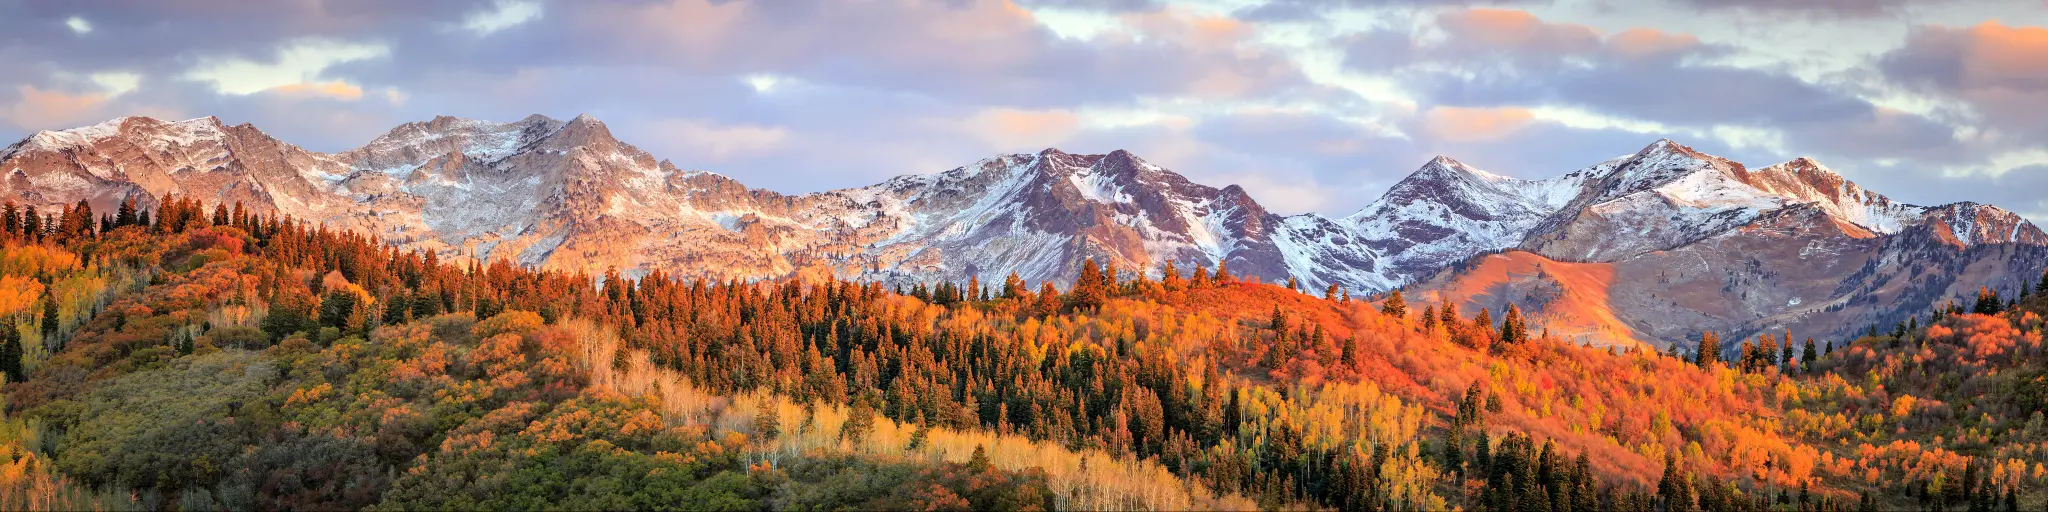 Wasatch Mountains in the fall as you approach Salt Lake City on the road trip from Denver.